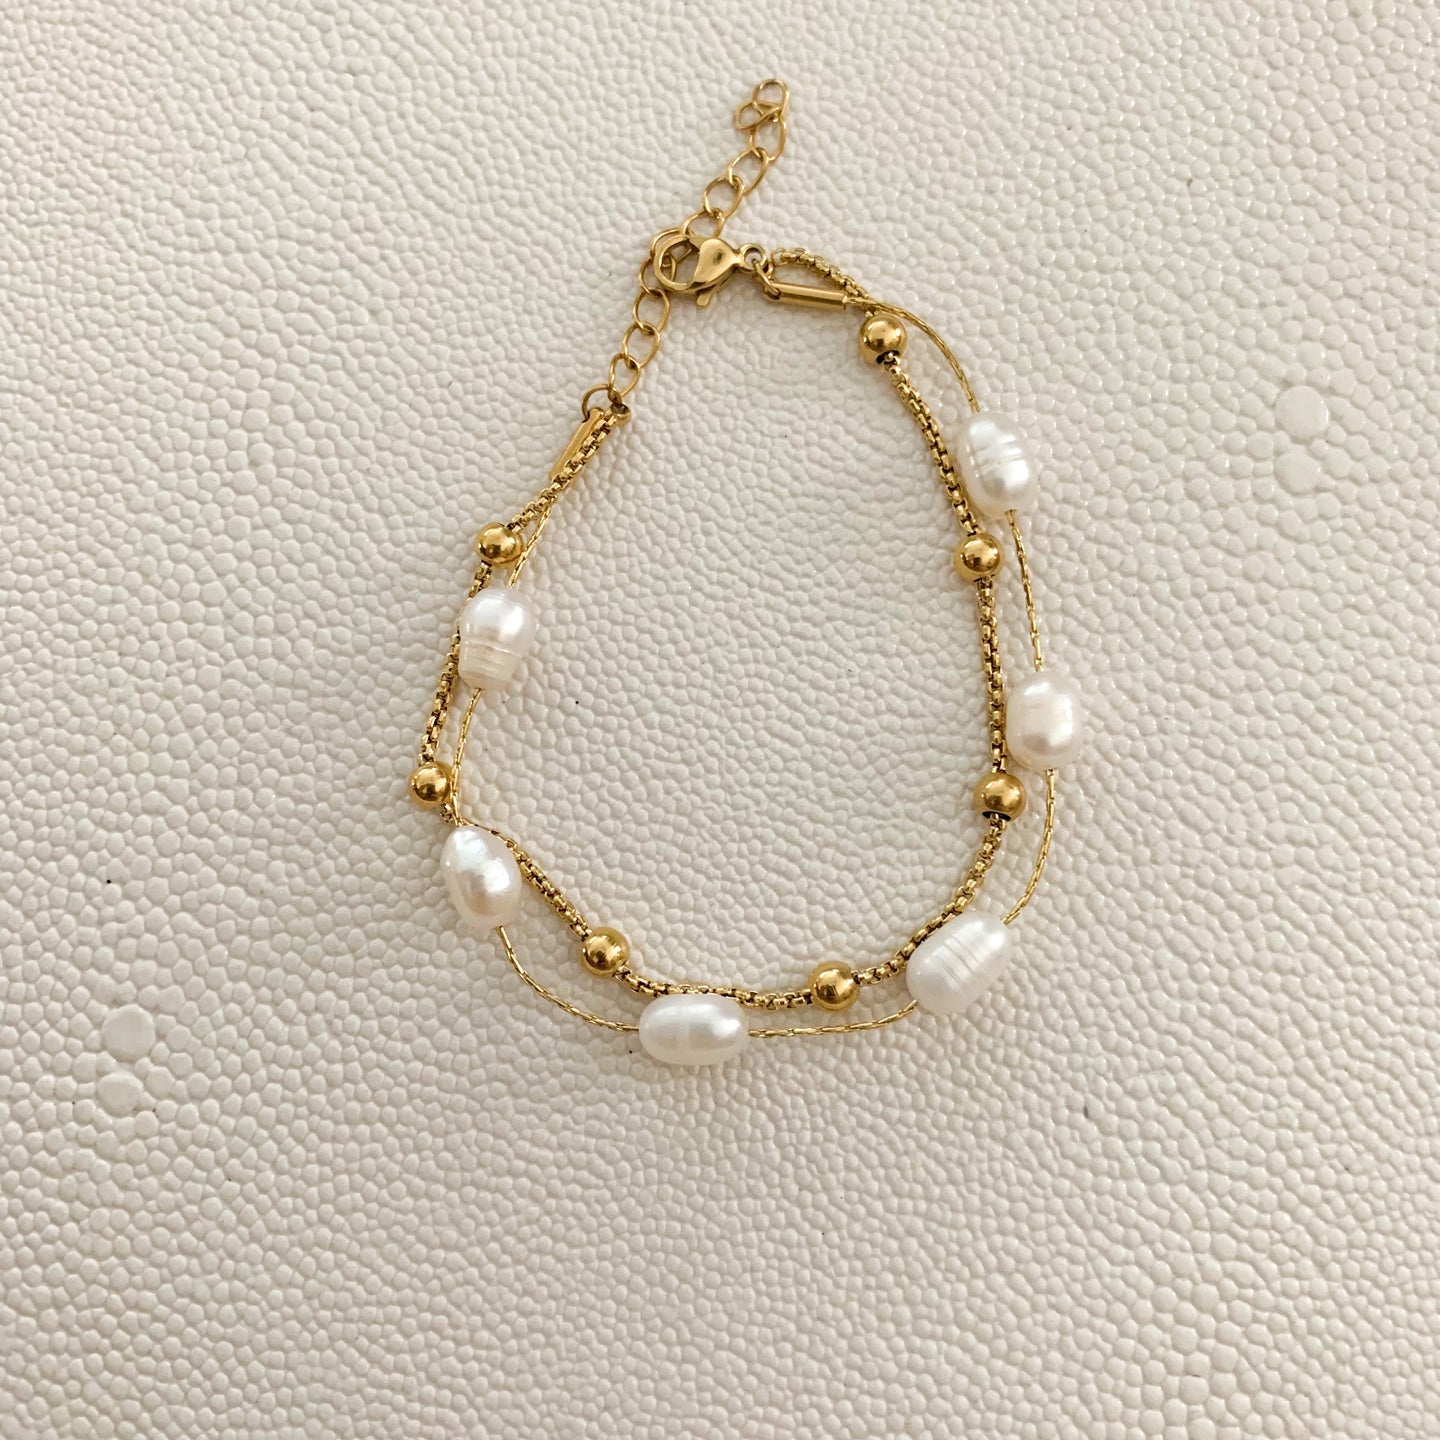 DRIP JEWELRY Double Bracelet - Pearls and Satellite